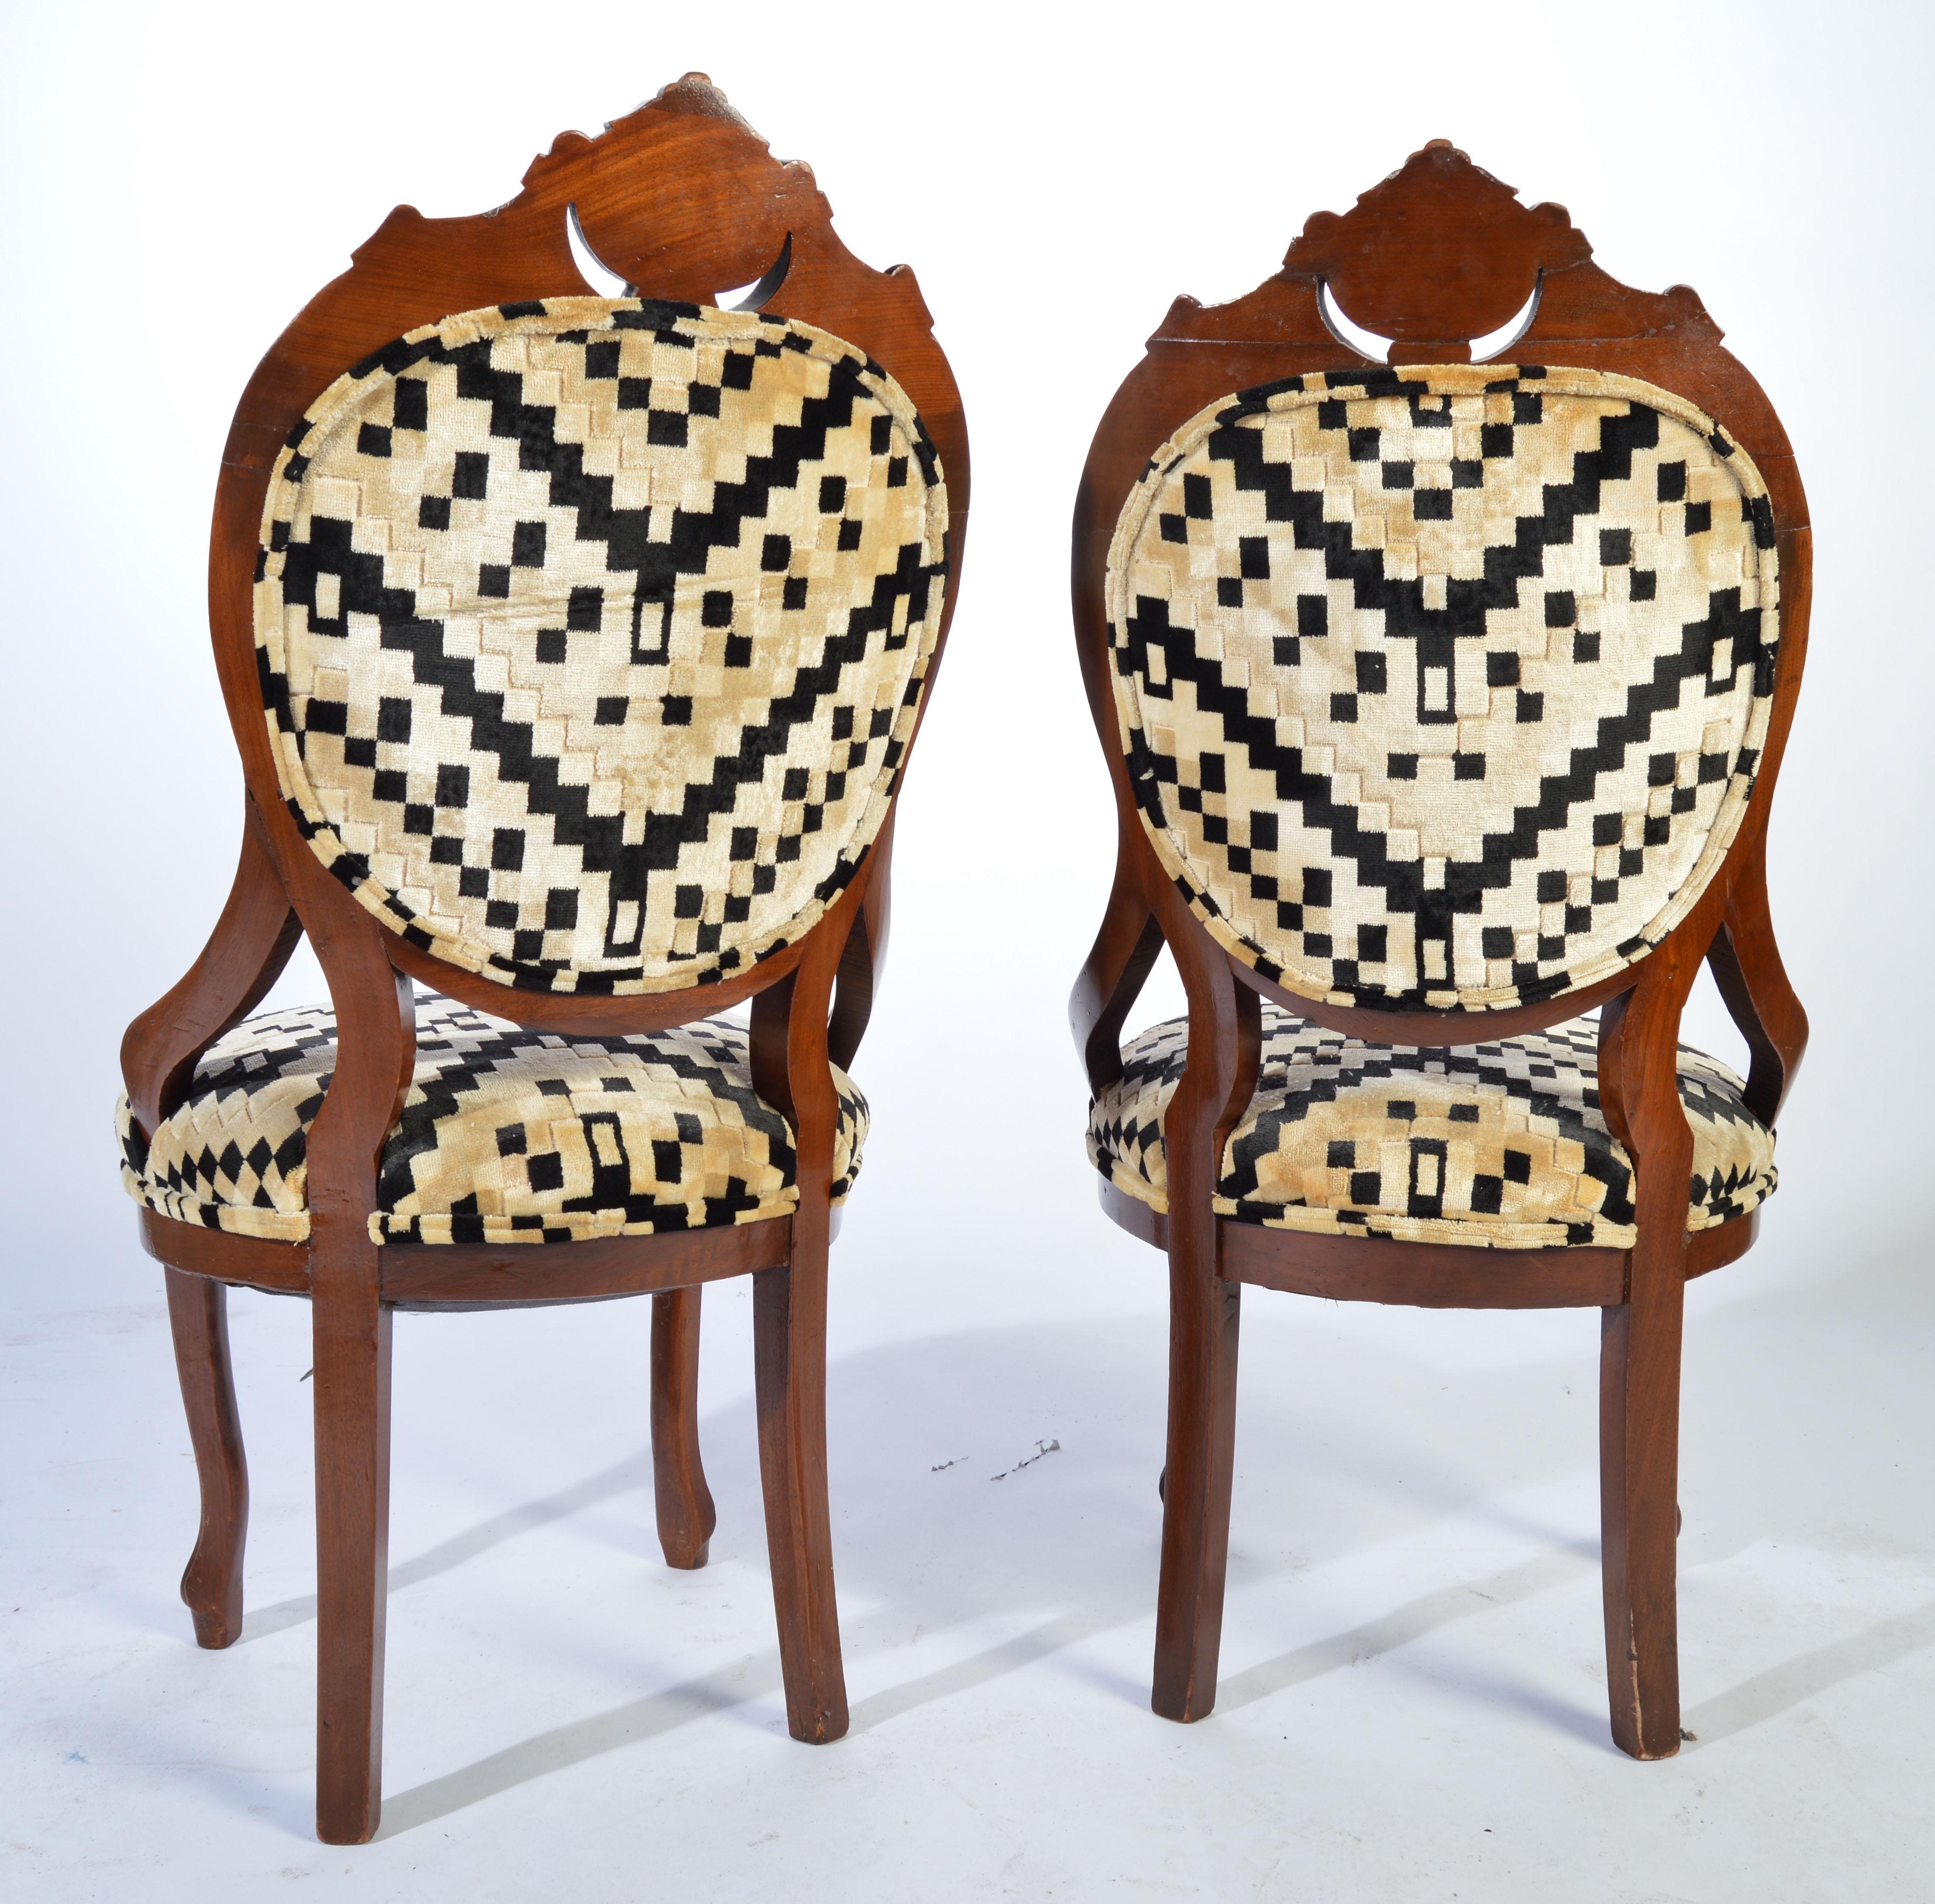 Hand-Carved Victorian Parlor Chairs Having Carved Mahogany Frames with Art Deco Upholstery